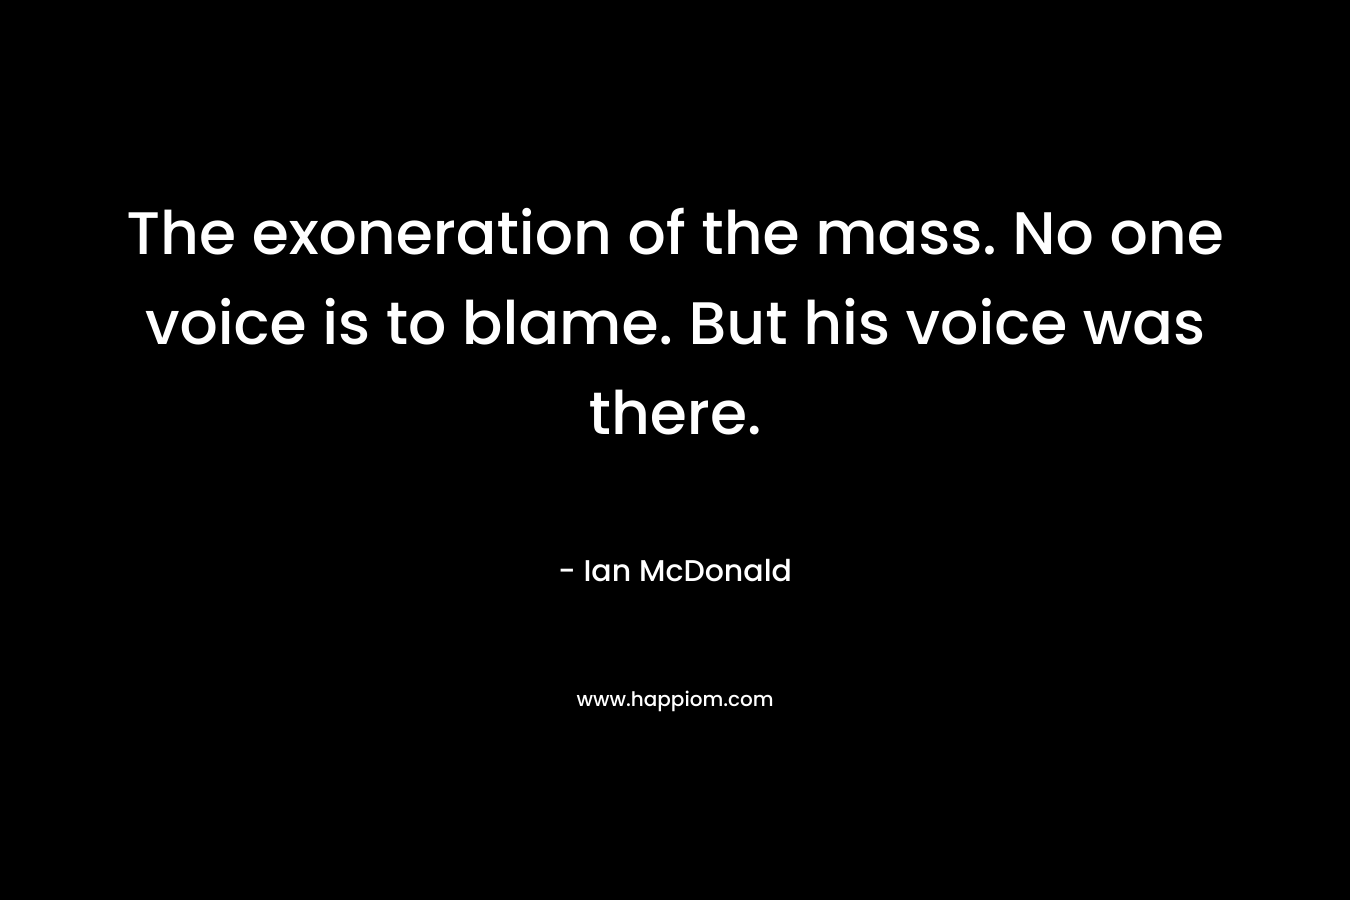 The exoneration of the mass. No one voice is to blame. But his voice was there.